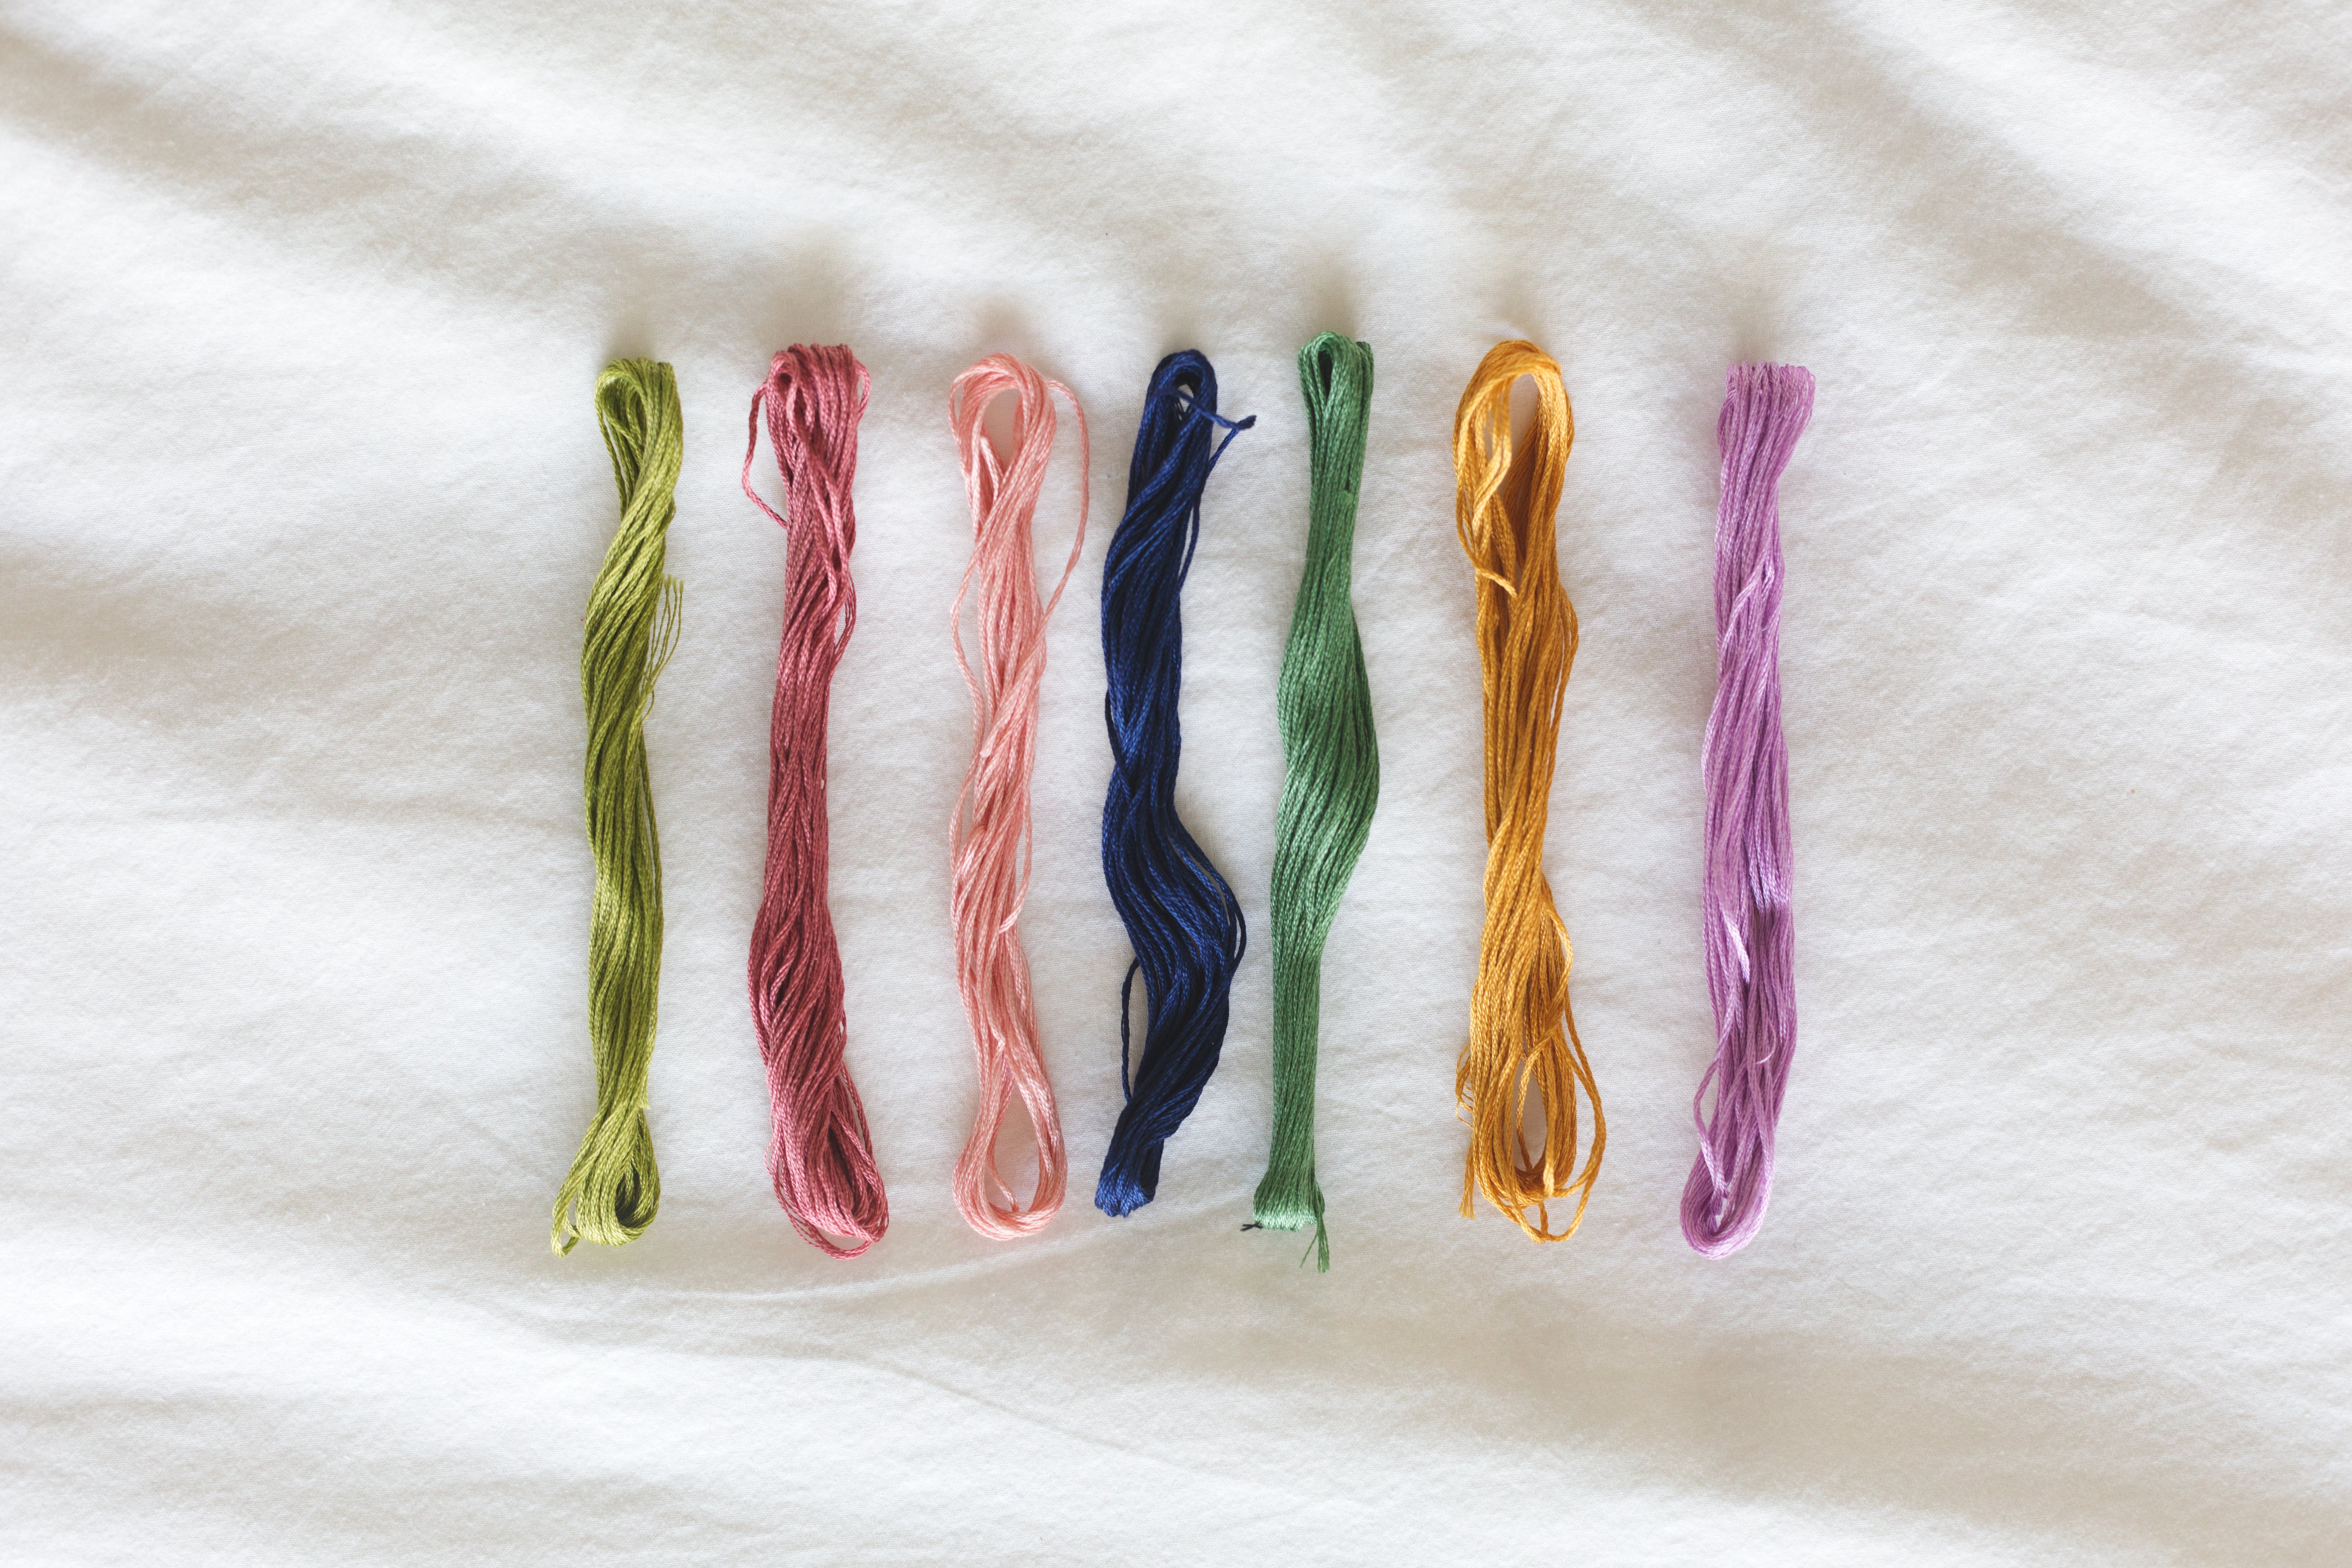 Browse Free HD Images of Embroidery Thread Lined Up For Crafting